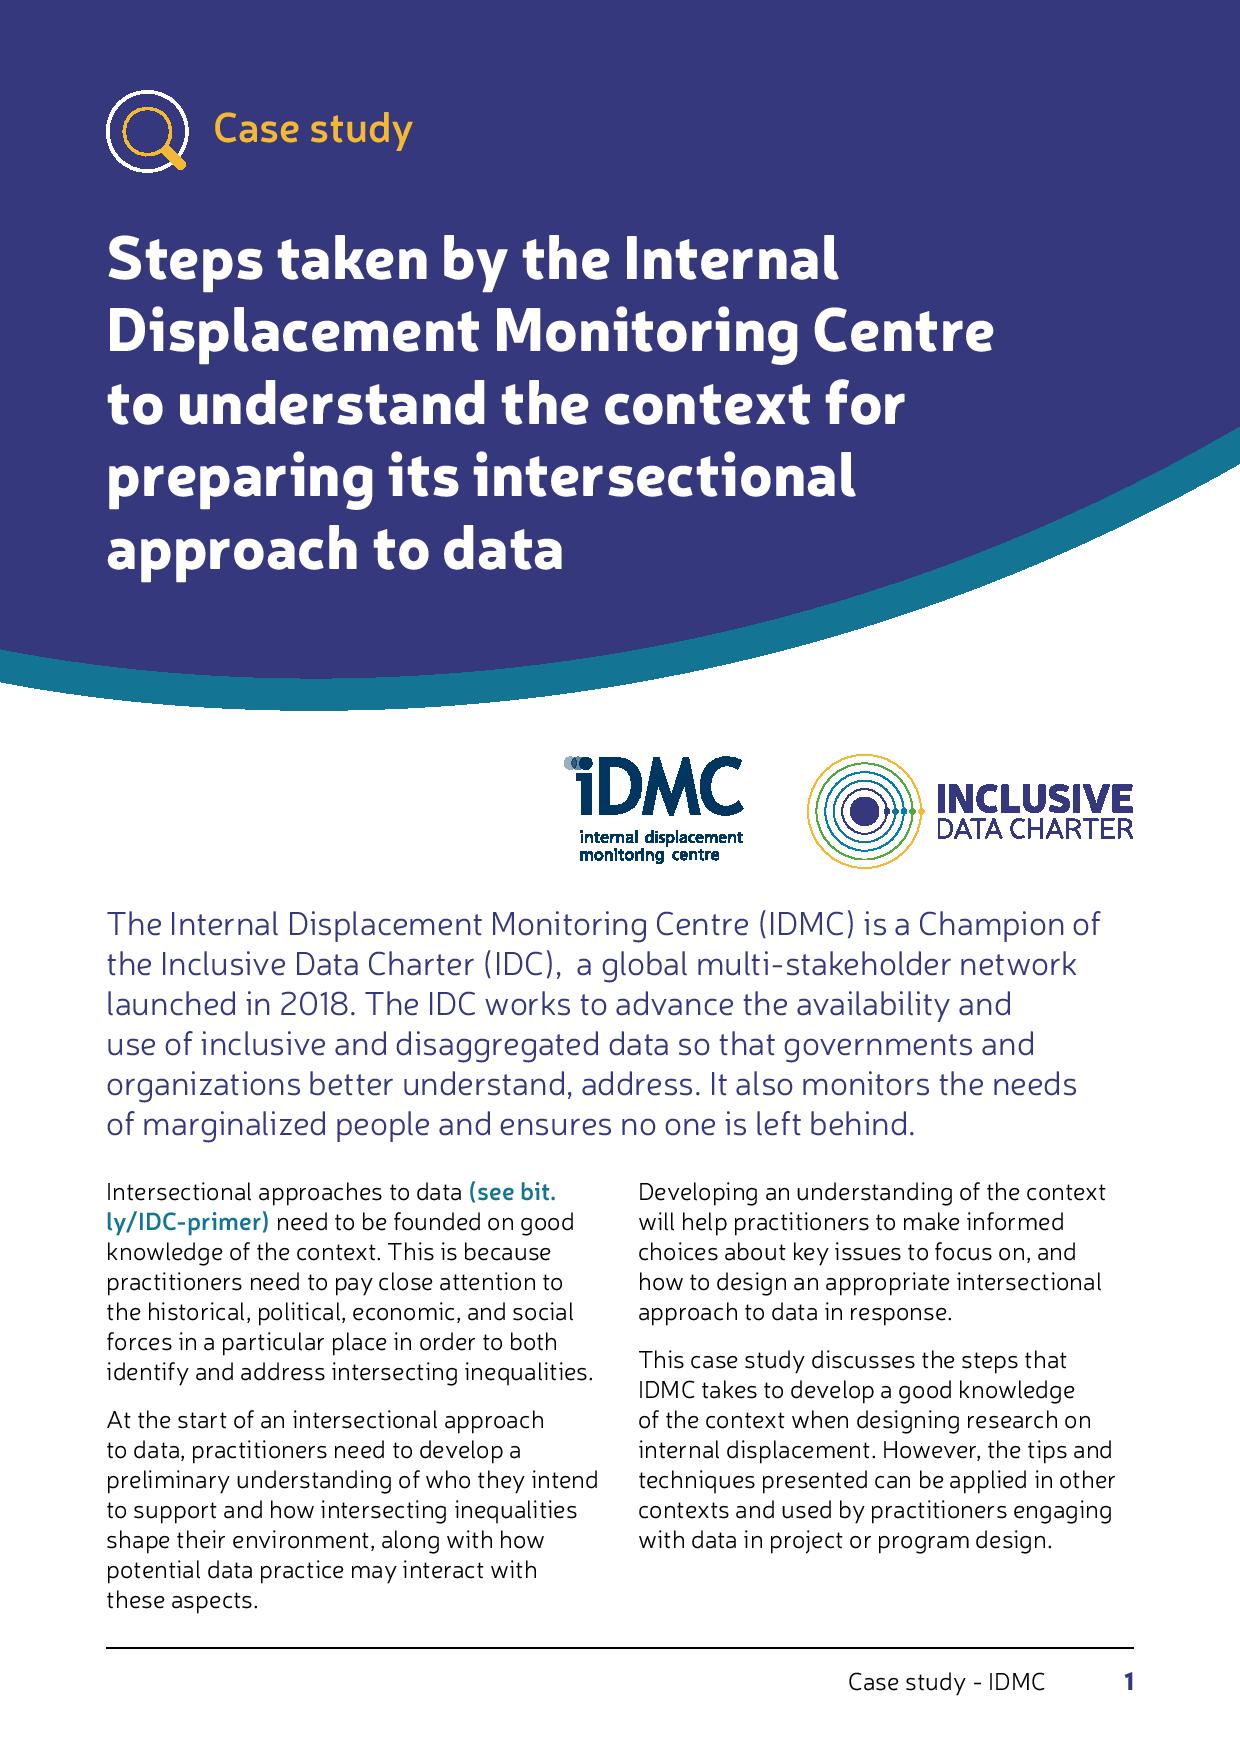 Steps taken by IDMC to understand the context for preparing  its intersectional approach to data